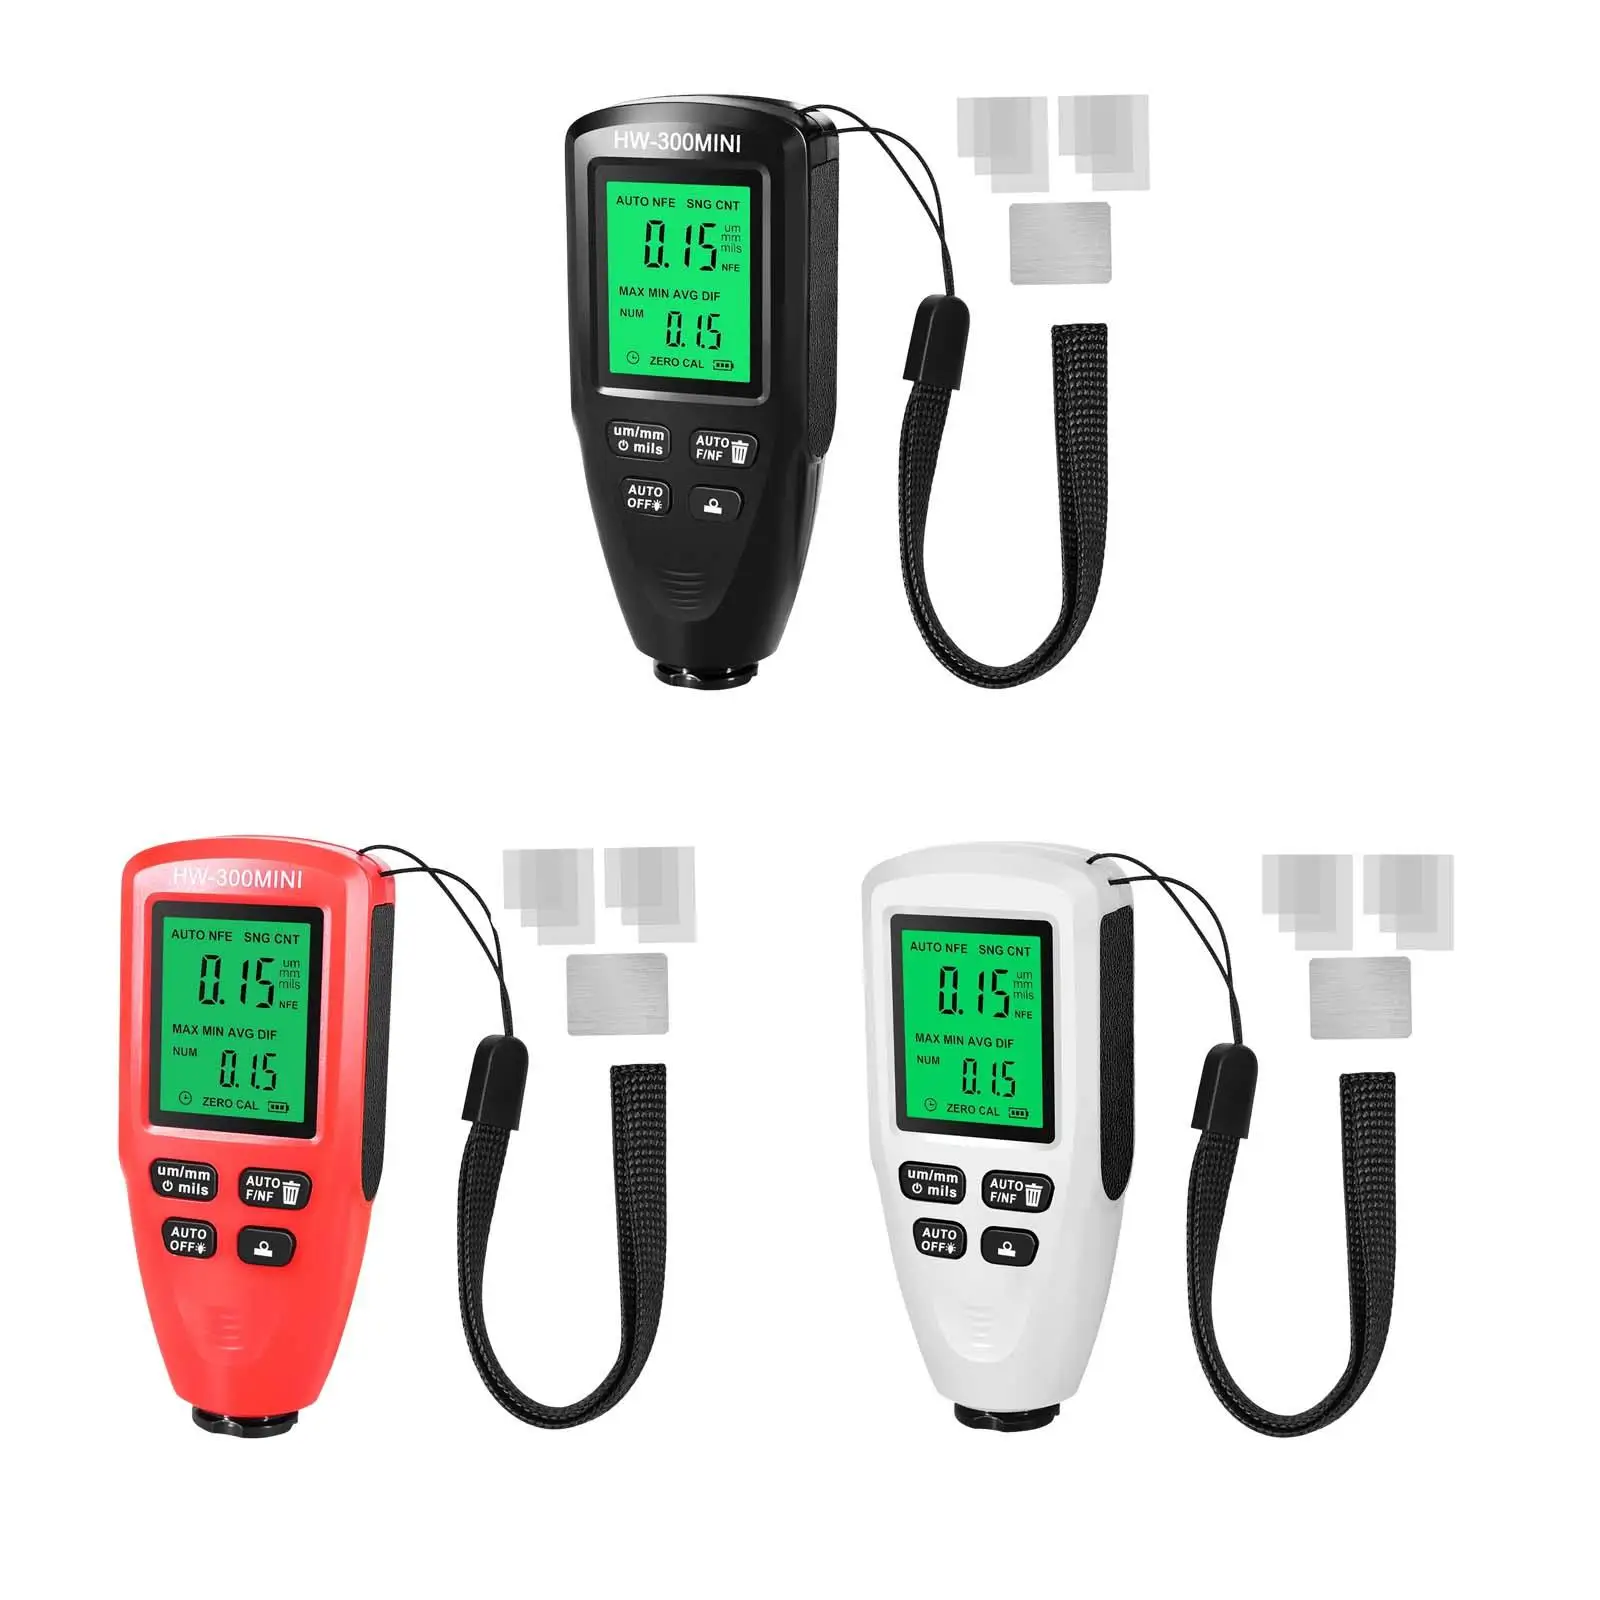 Thickness Gauge with Self Calibration Paint Layer Gauge for Iron and Aluminium Bodies Used Car Buyers Manufacturing Automotive